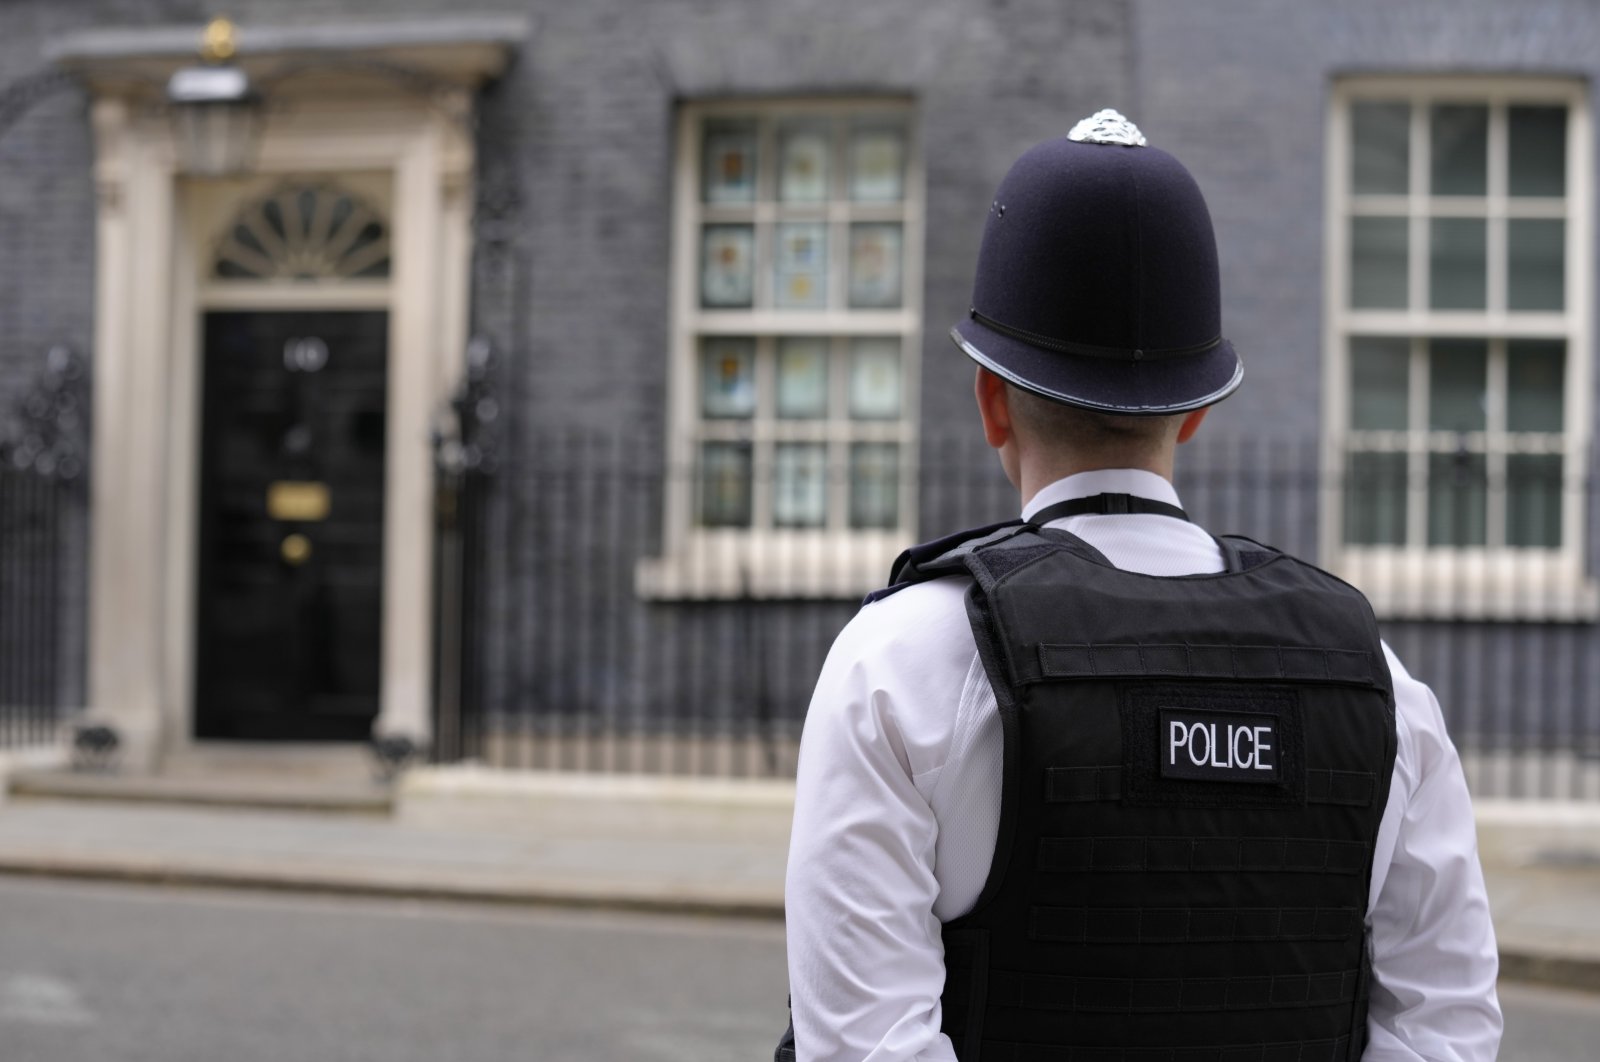 A police officer stands opposite the door of 10 Downing Street in London, Tuesday, April 12, 2022. U.K. Prime Minister Boris Johnson's office says he will be issued a fine for breaching COVID-19 regulations following allegations of lockdown parties at government offices. Treasury Chief Rishi Sunak will also be fined. (AP Photo/Kirsty Wigglesworth)